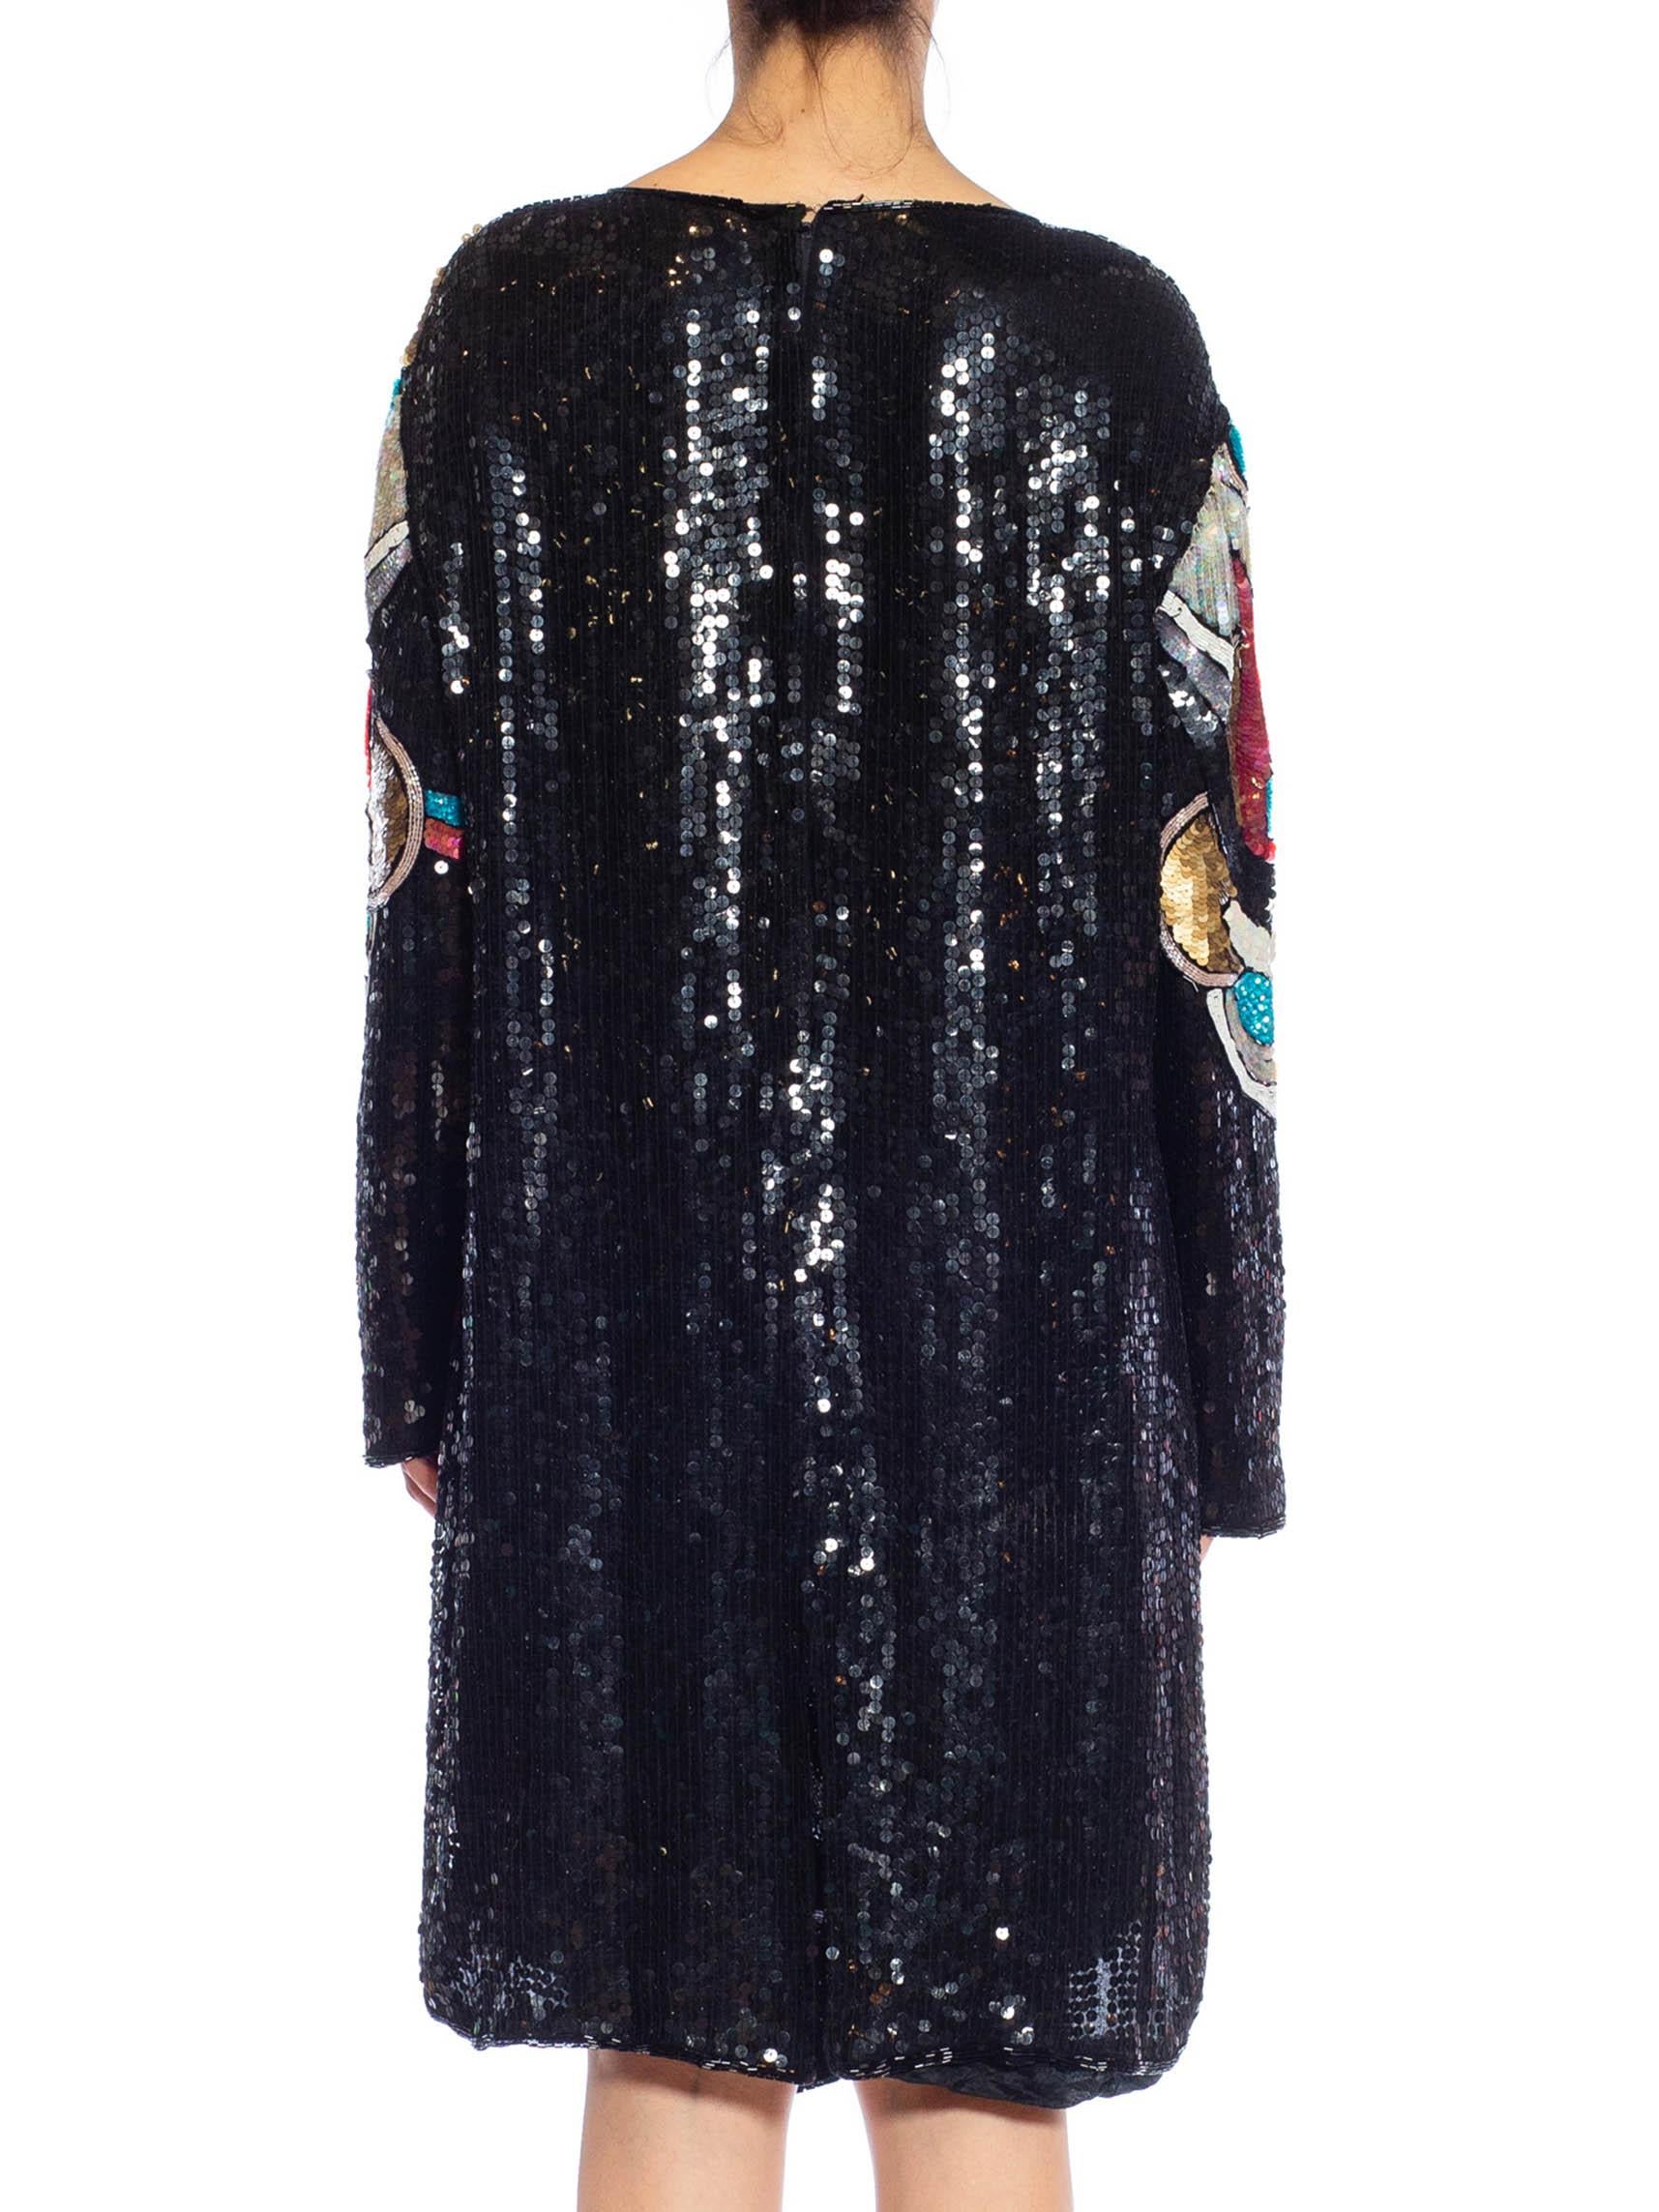 1980S Black & White Multicolored Beaded Silk Abstract Art Cocktail Dress For Sale 6